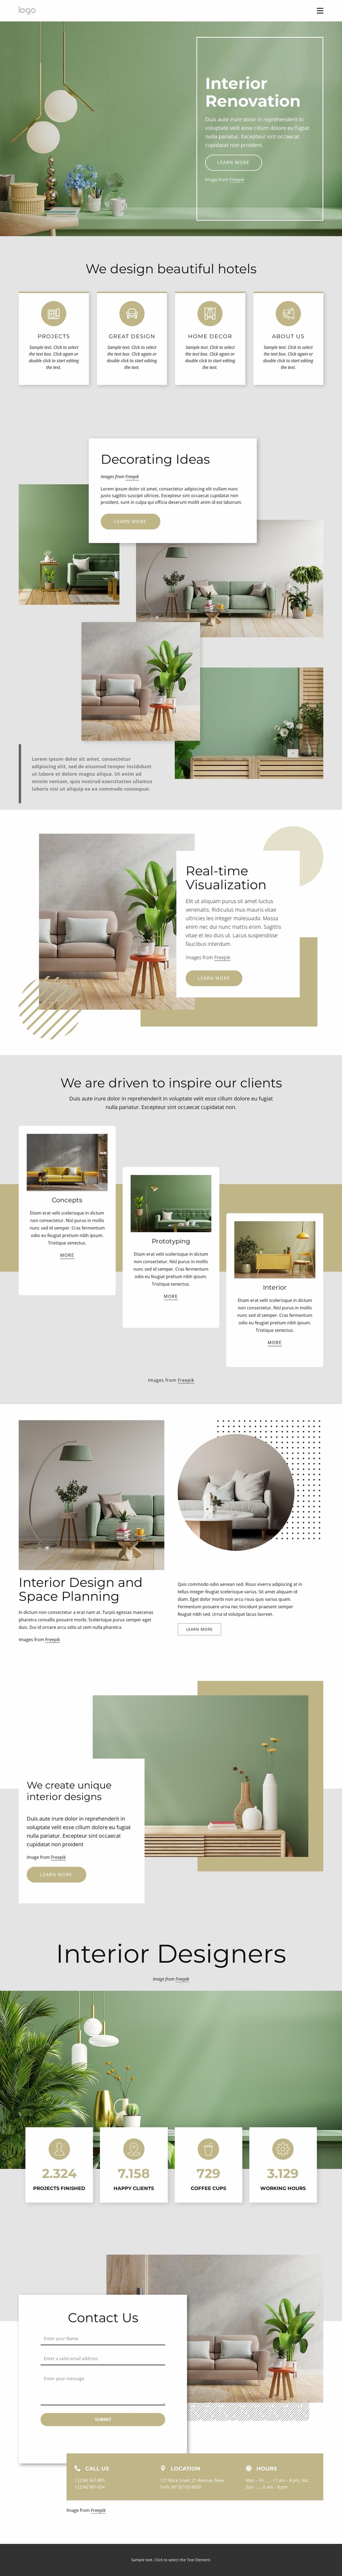 Architecture and interior design agency Landing Page